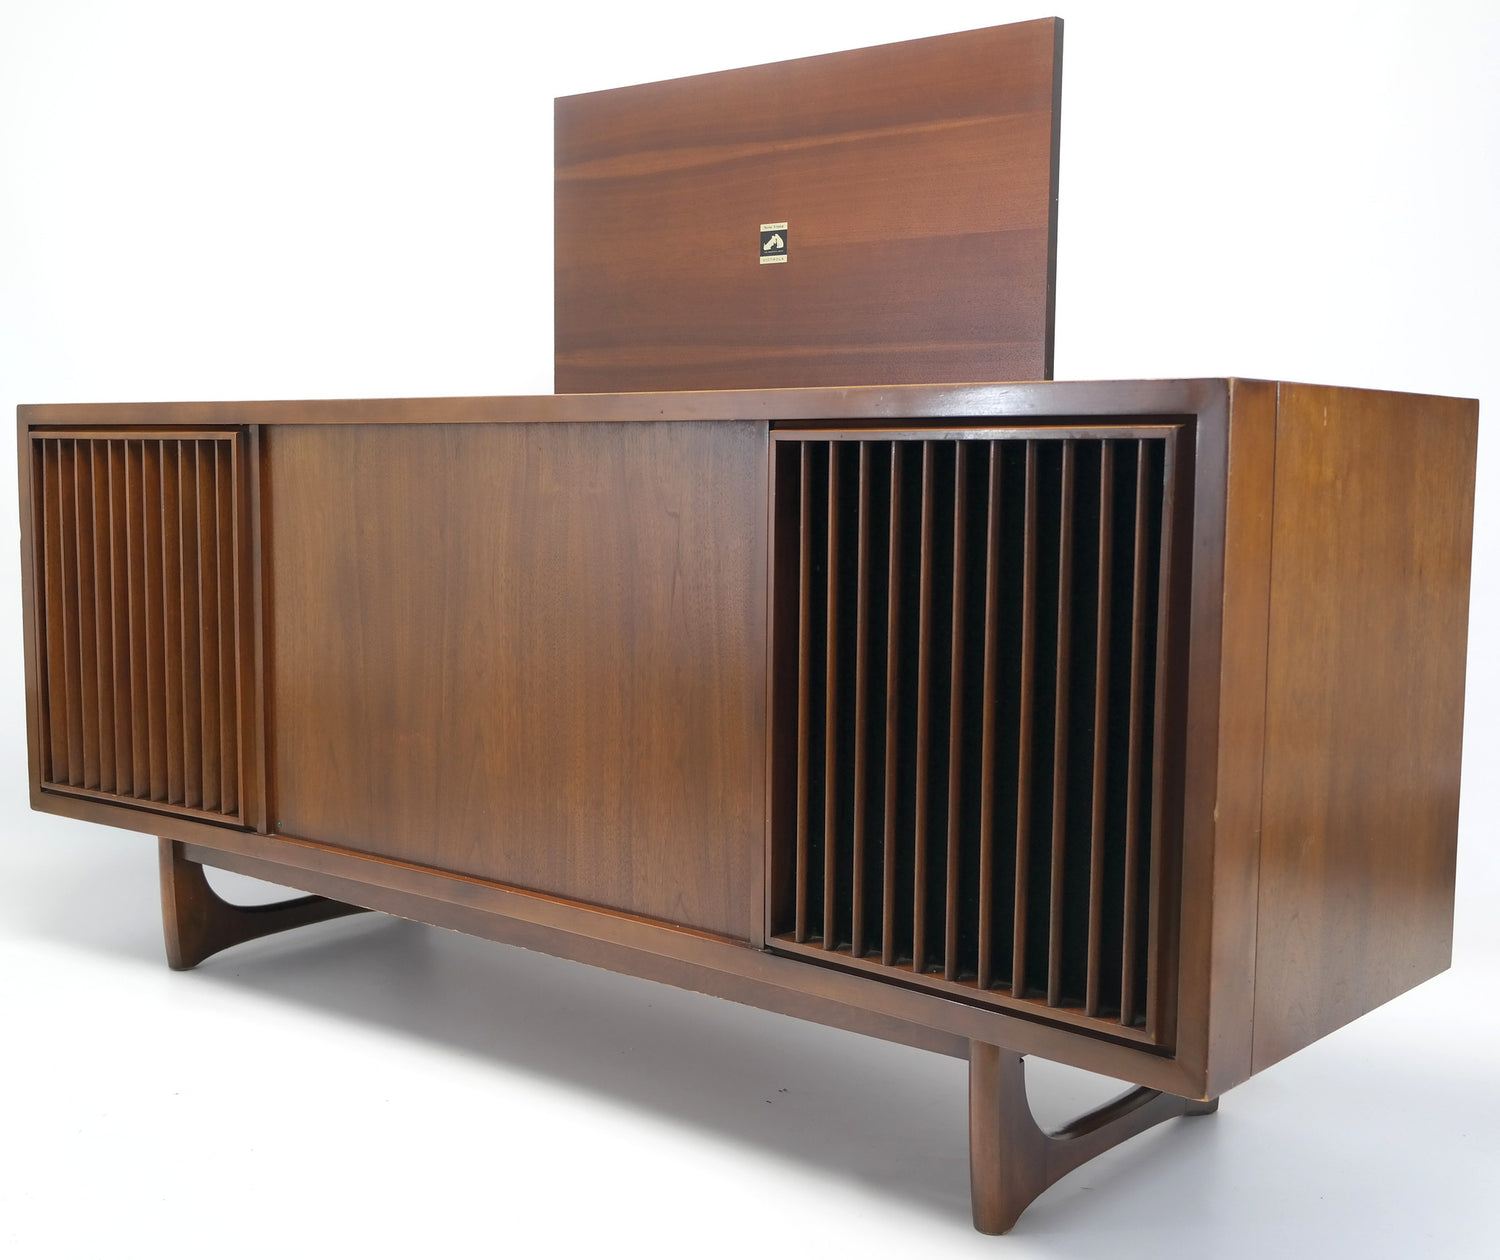 Mid Century Modern RCA STEREO CONSOLE - 60's - Mid Century RCA Record Player - Bluetooth - AM FM The Vintedge Co.